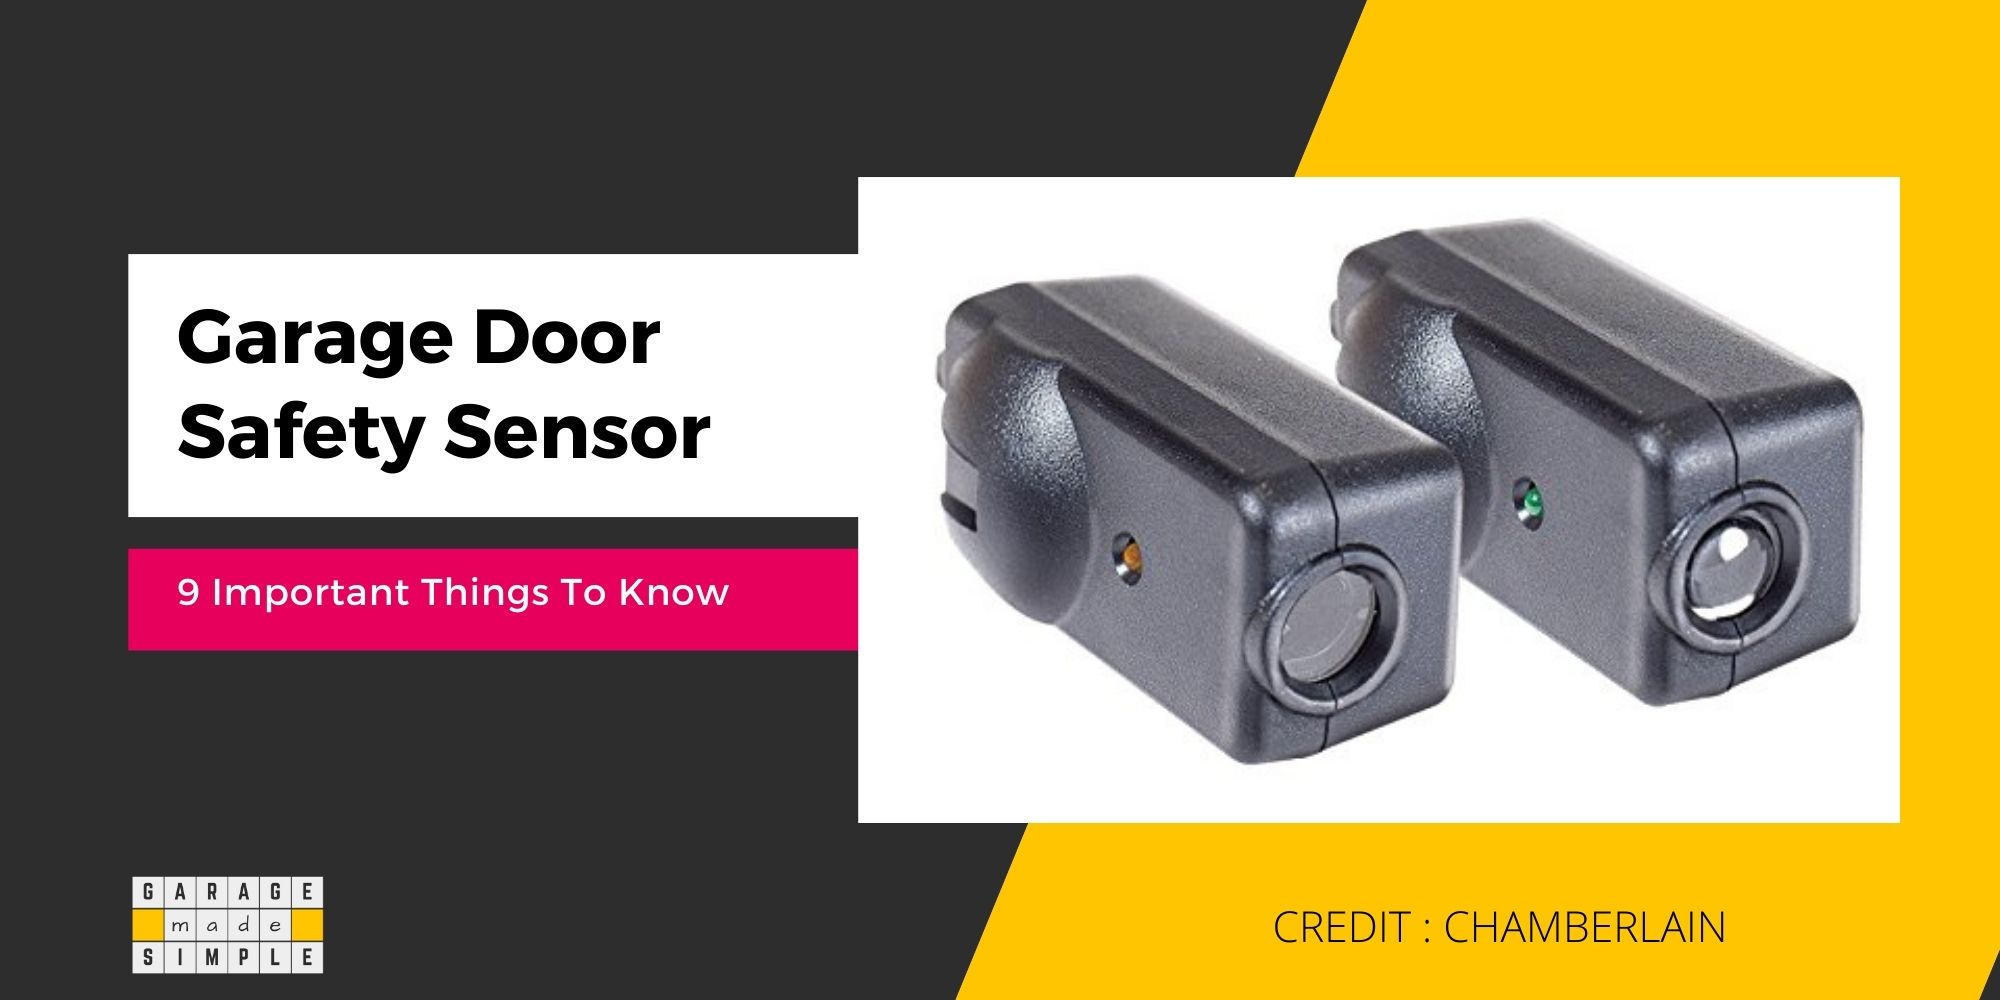 9 Important Things To Know About Garage Door Safety Sensors